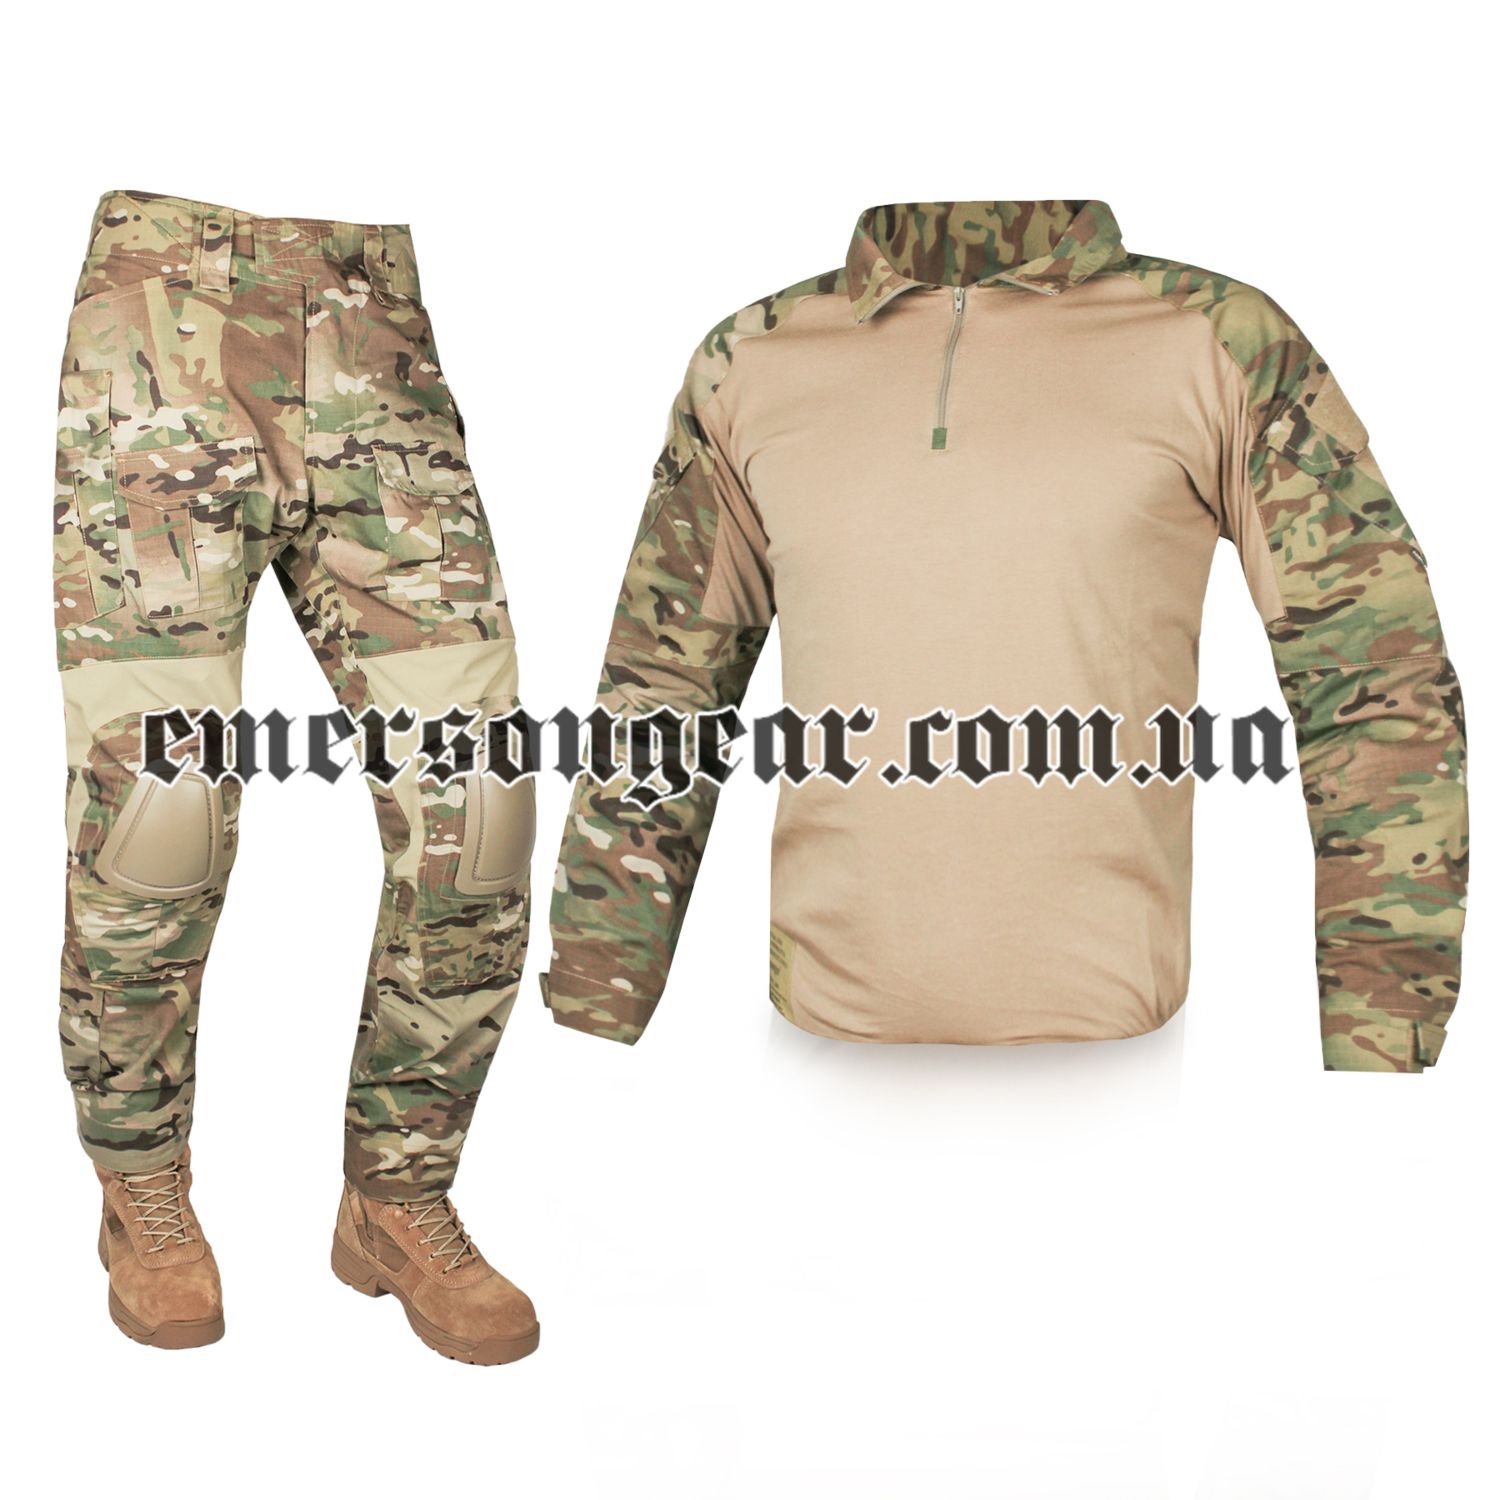 Buy Emerson Gear Military Uniforms | Low prices | Delivery 